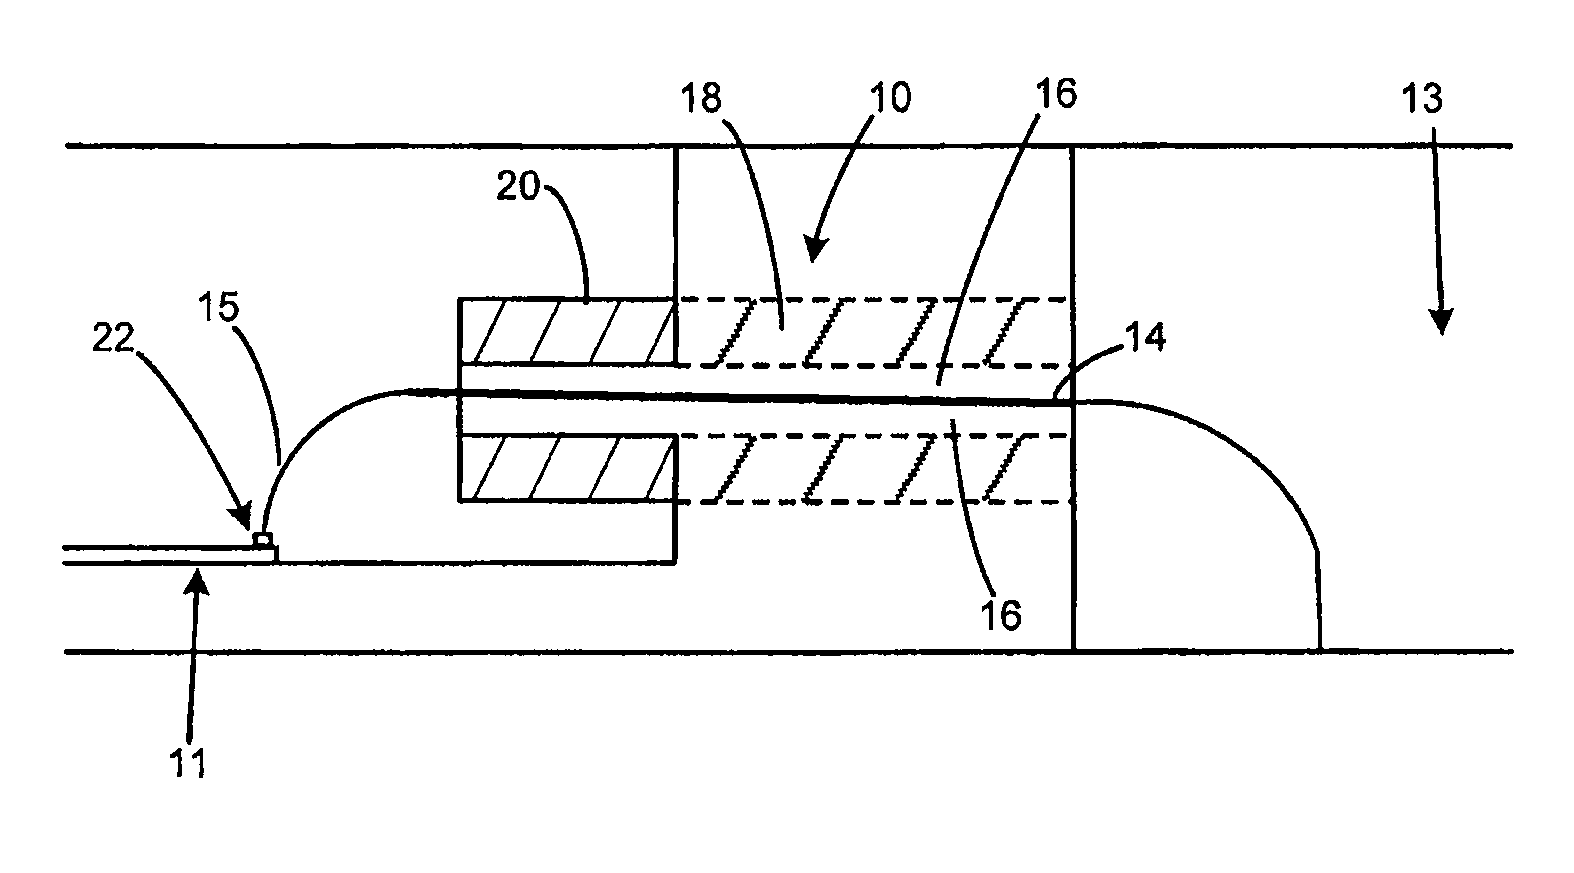 Direct coaxial interface for circuits